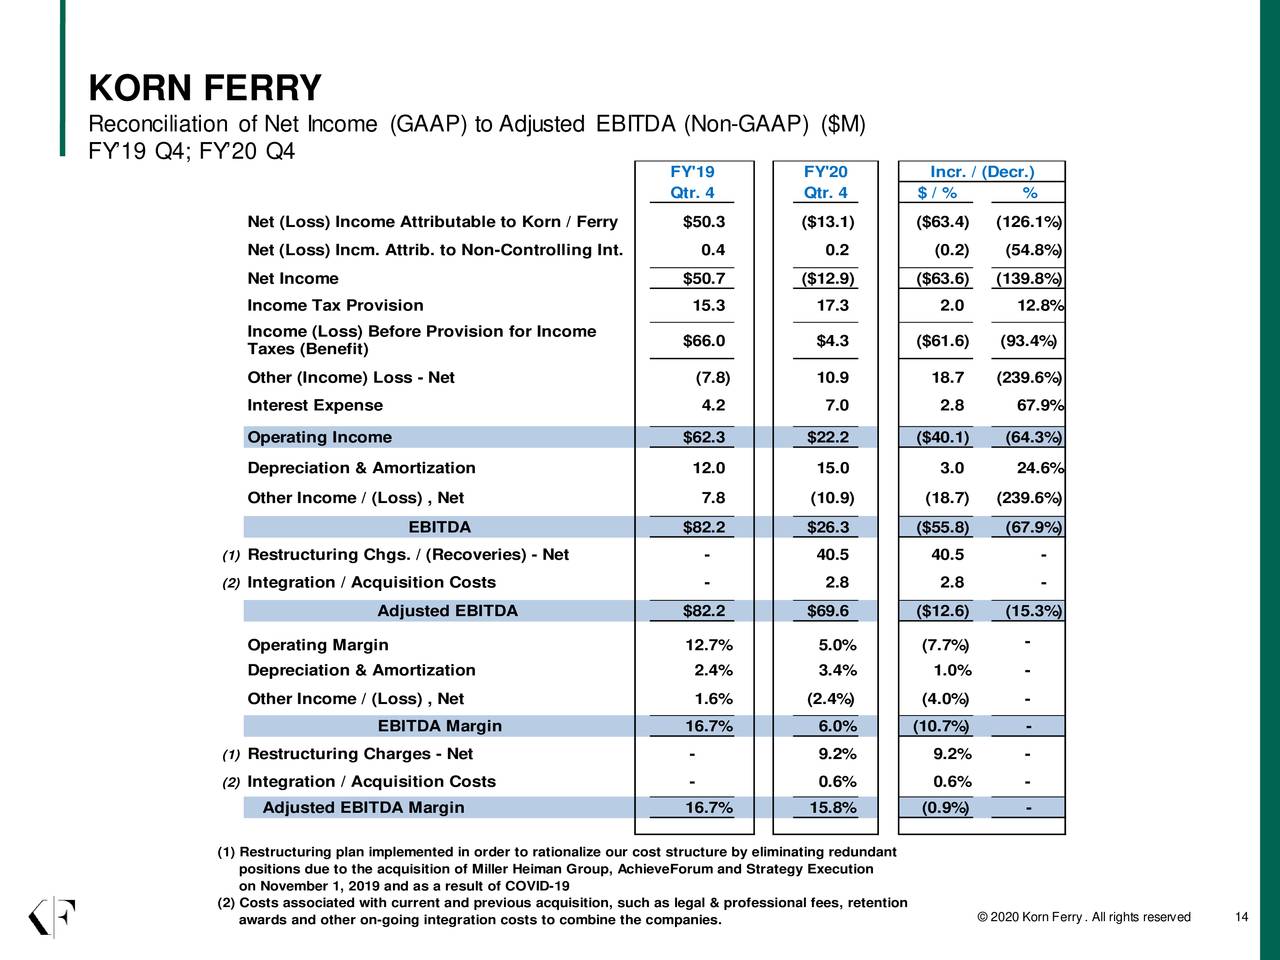 Korn Ferry 2020 Q4 Results Earnings Call Presentation (NYSEKFY